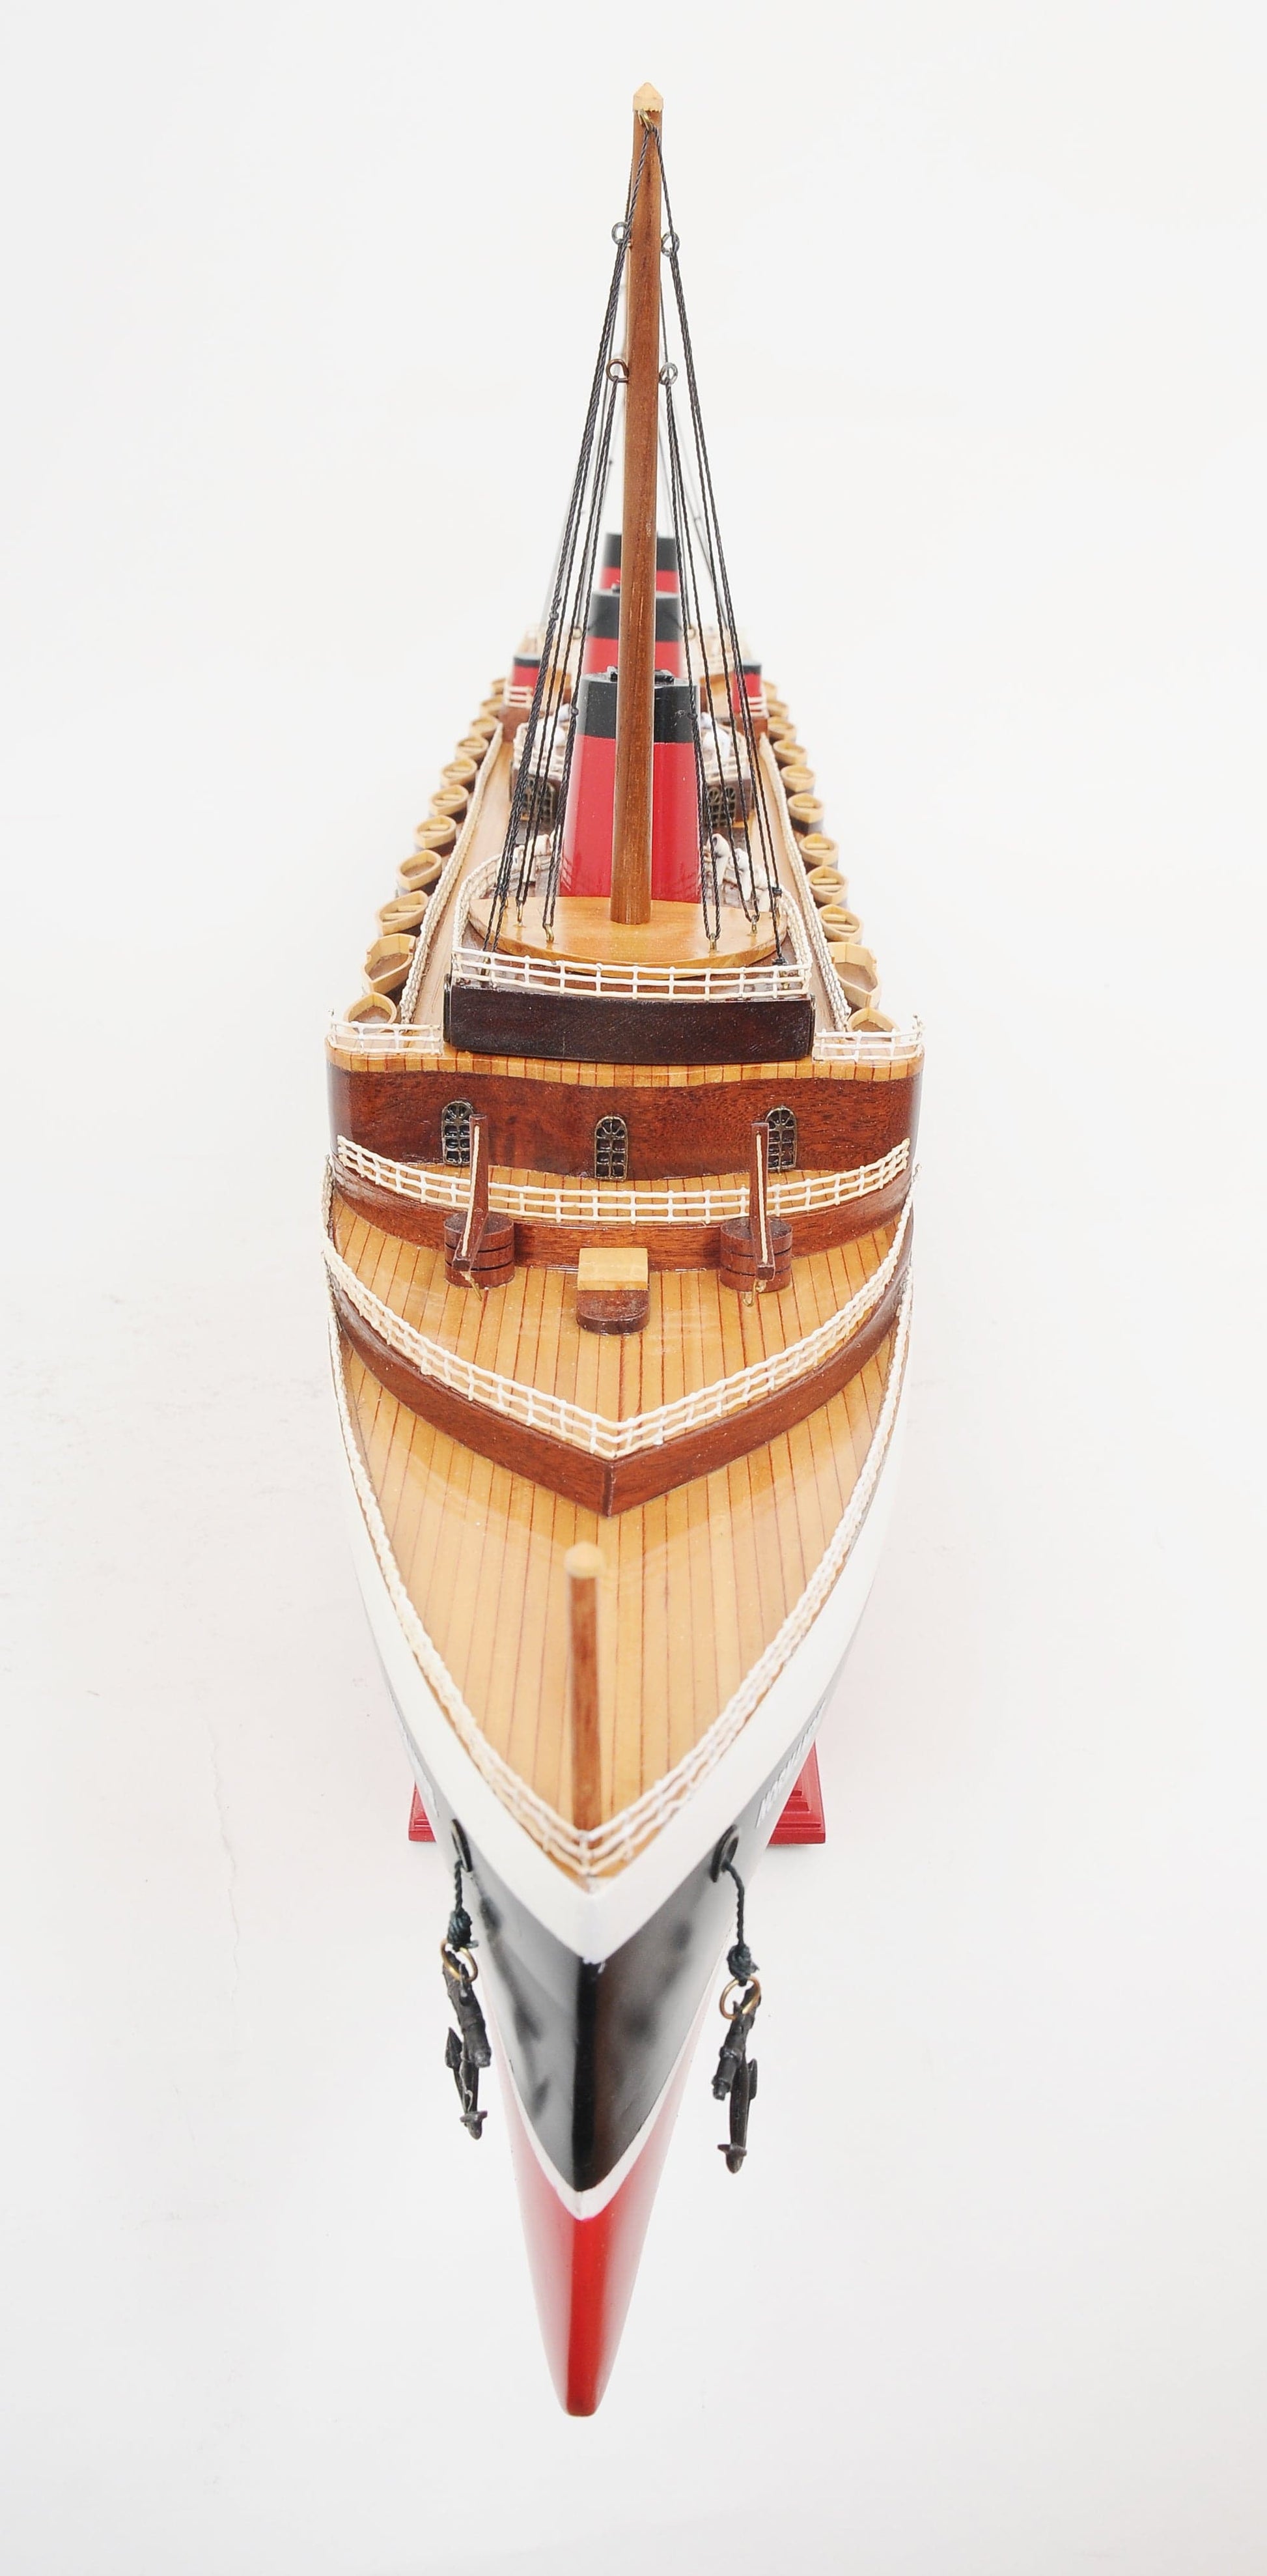 ALDO Hobbies & Creative Arts> Collectibles> Scale Model L: 41 W: 5.5 H: 14.5 Inches / NEW / Wood T.S.S. Normandie French Painted Passenger Ship Ocean Liner Large Wood Model Assembled